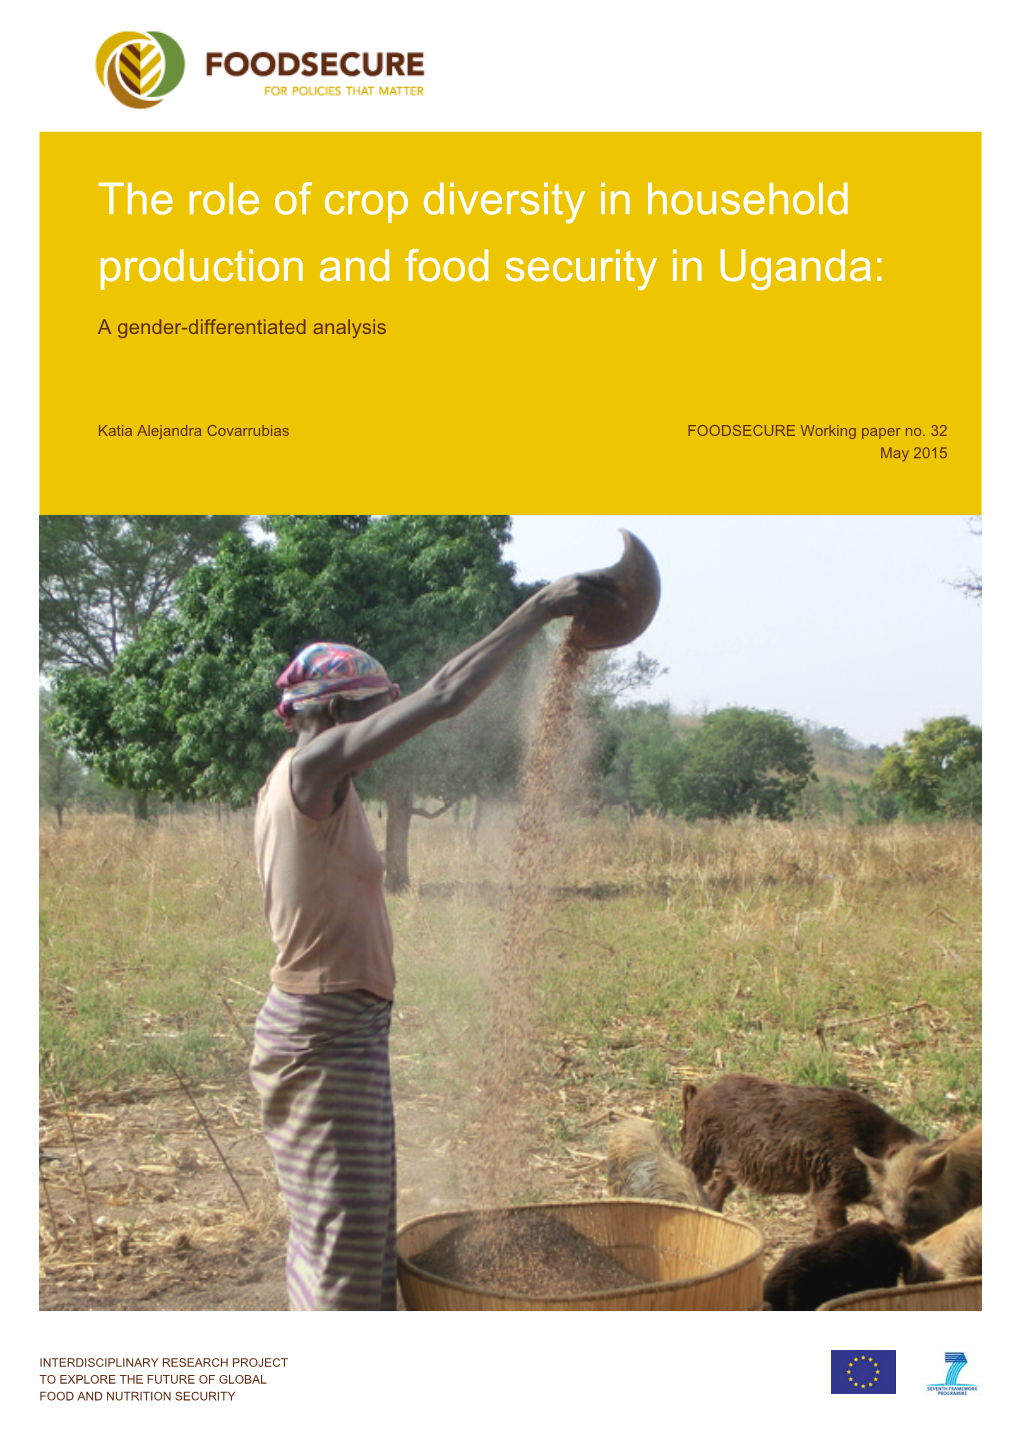 The Role of Crop Diversity in Household Production and Food Security in Uganda